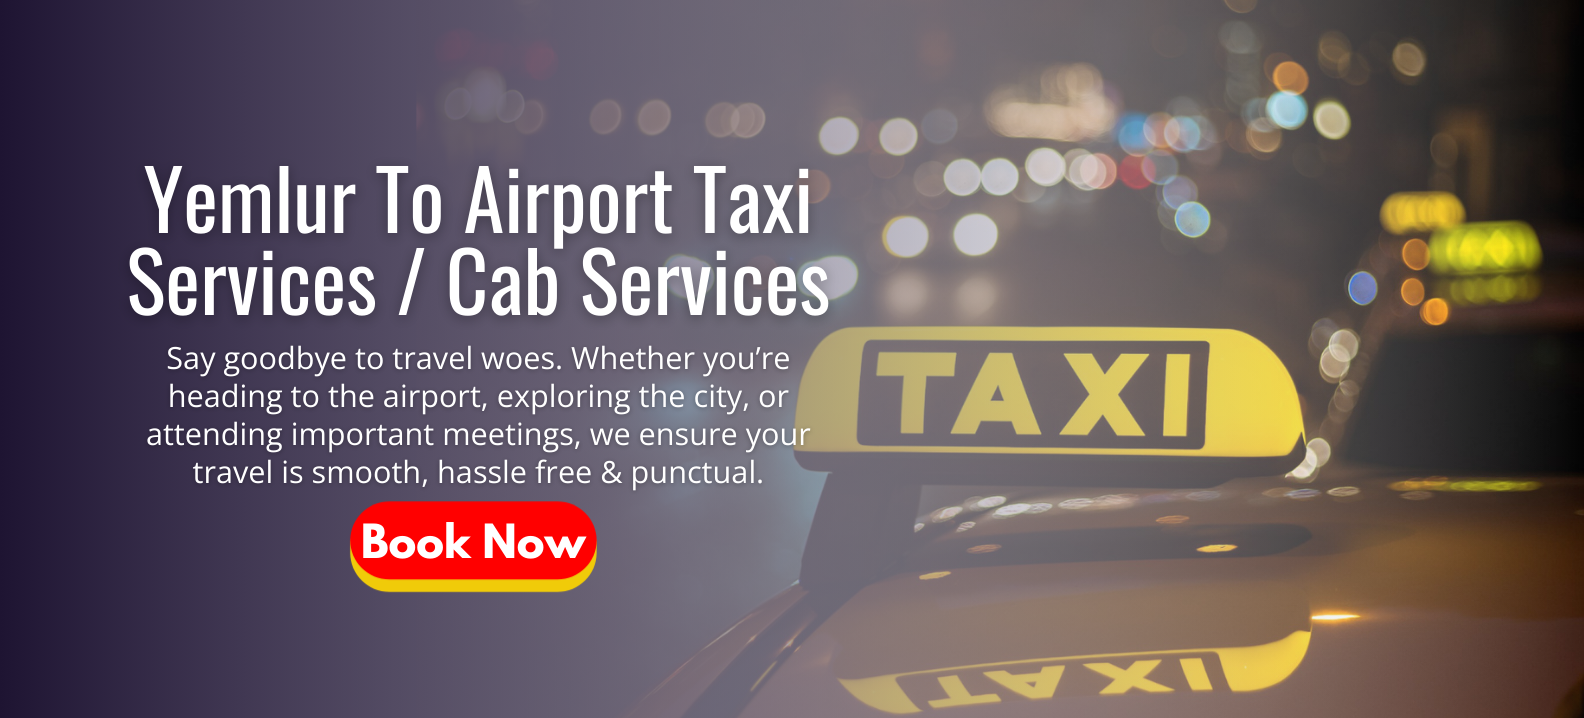 Yemalur to Airport Taxi Services | Cab Services